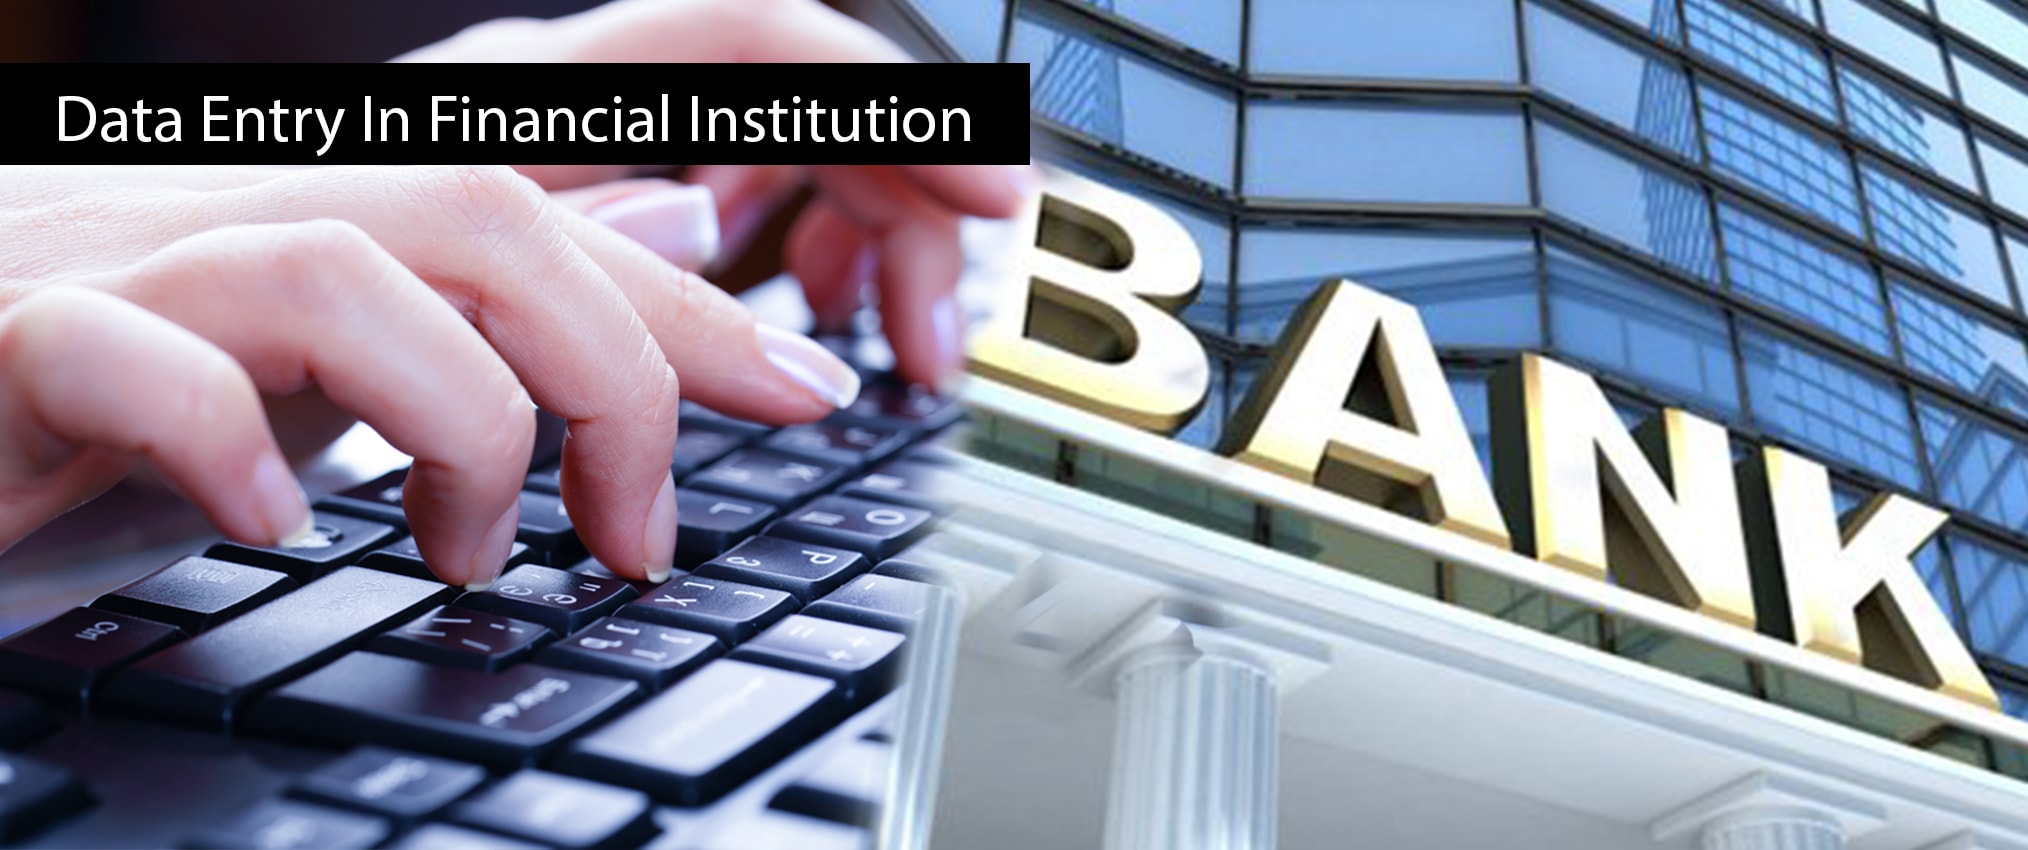 data-entry-in-financial-institution